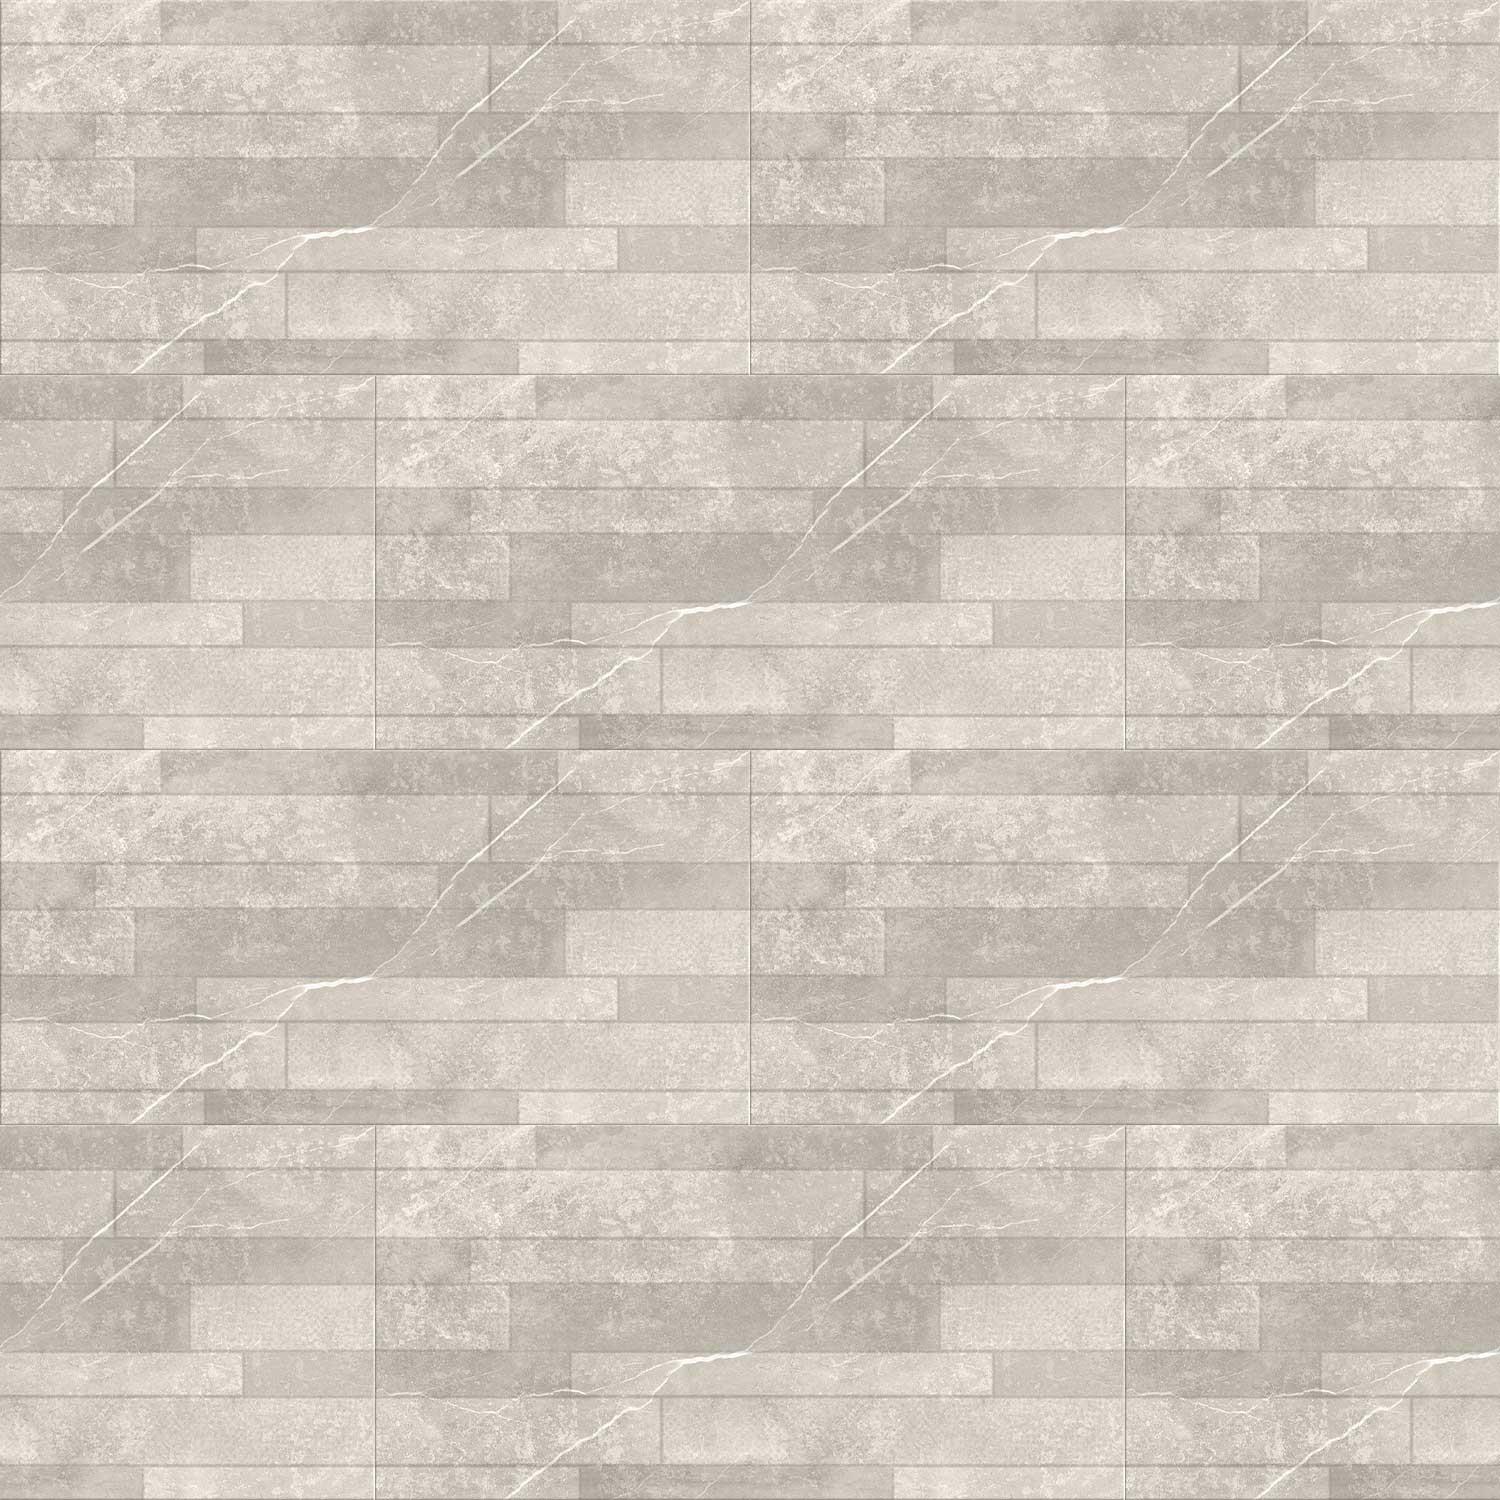 Canyon Decor White Porcelain Tile Wall Floor Indoors 295 x 595mm